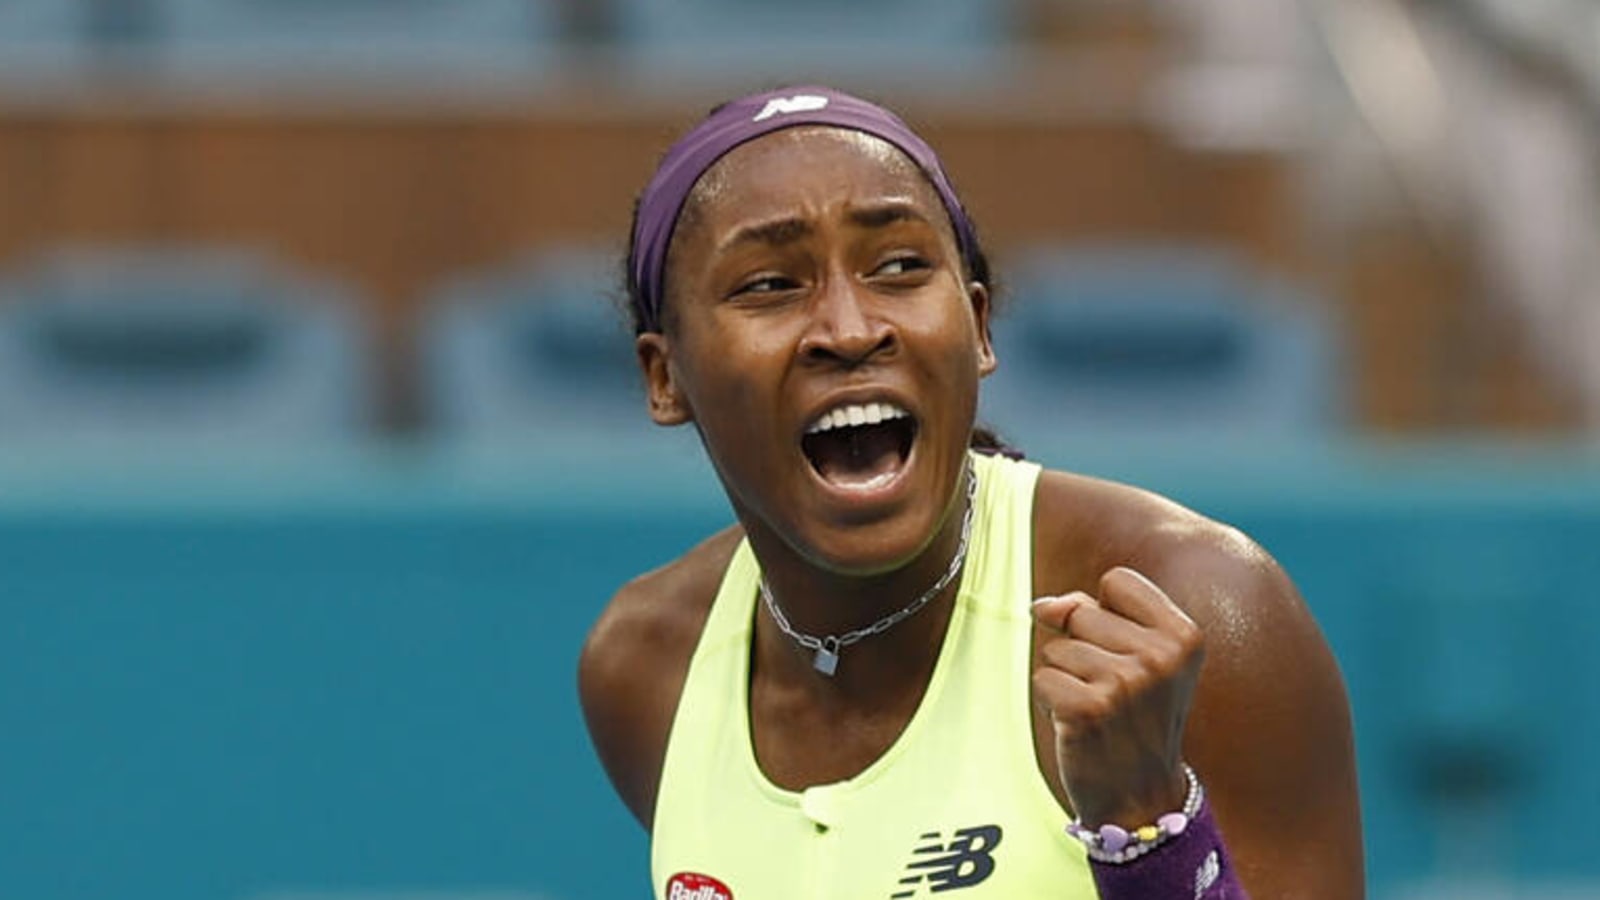 Coco Gauff recovers to beat Oceane Dodin at Miami Open